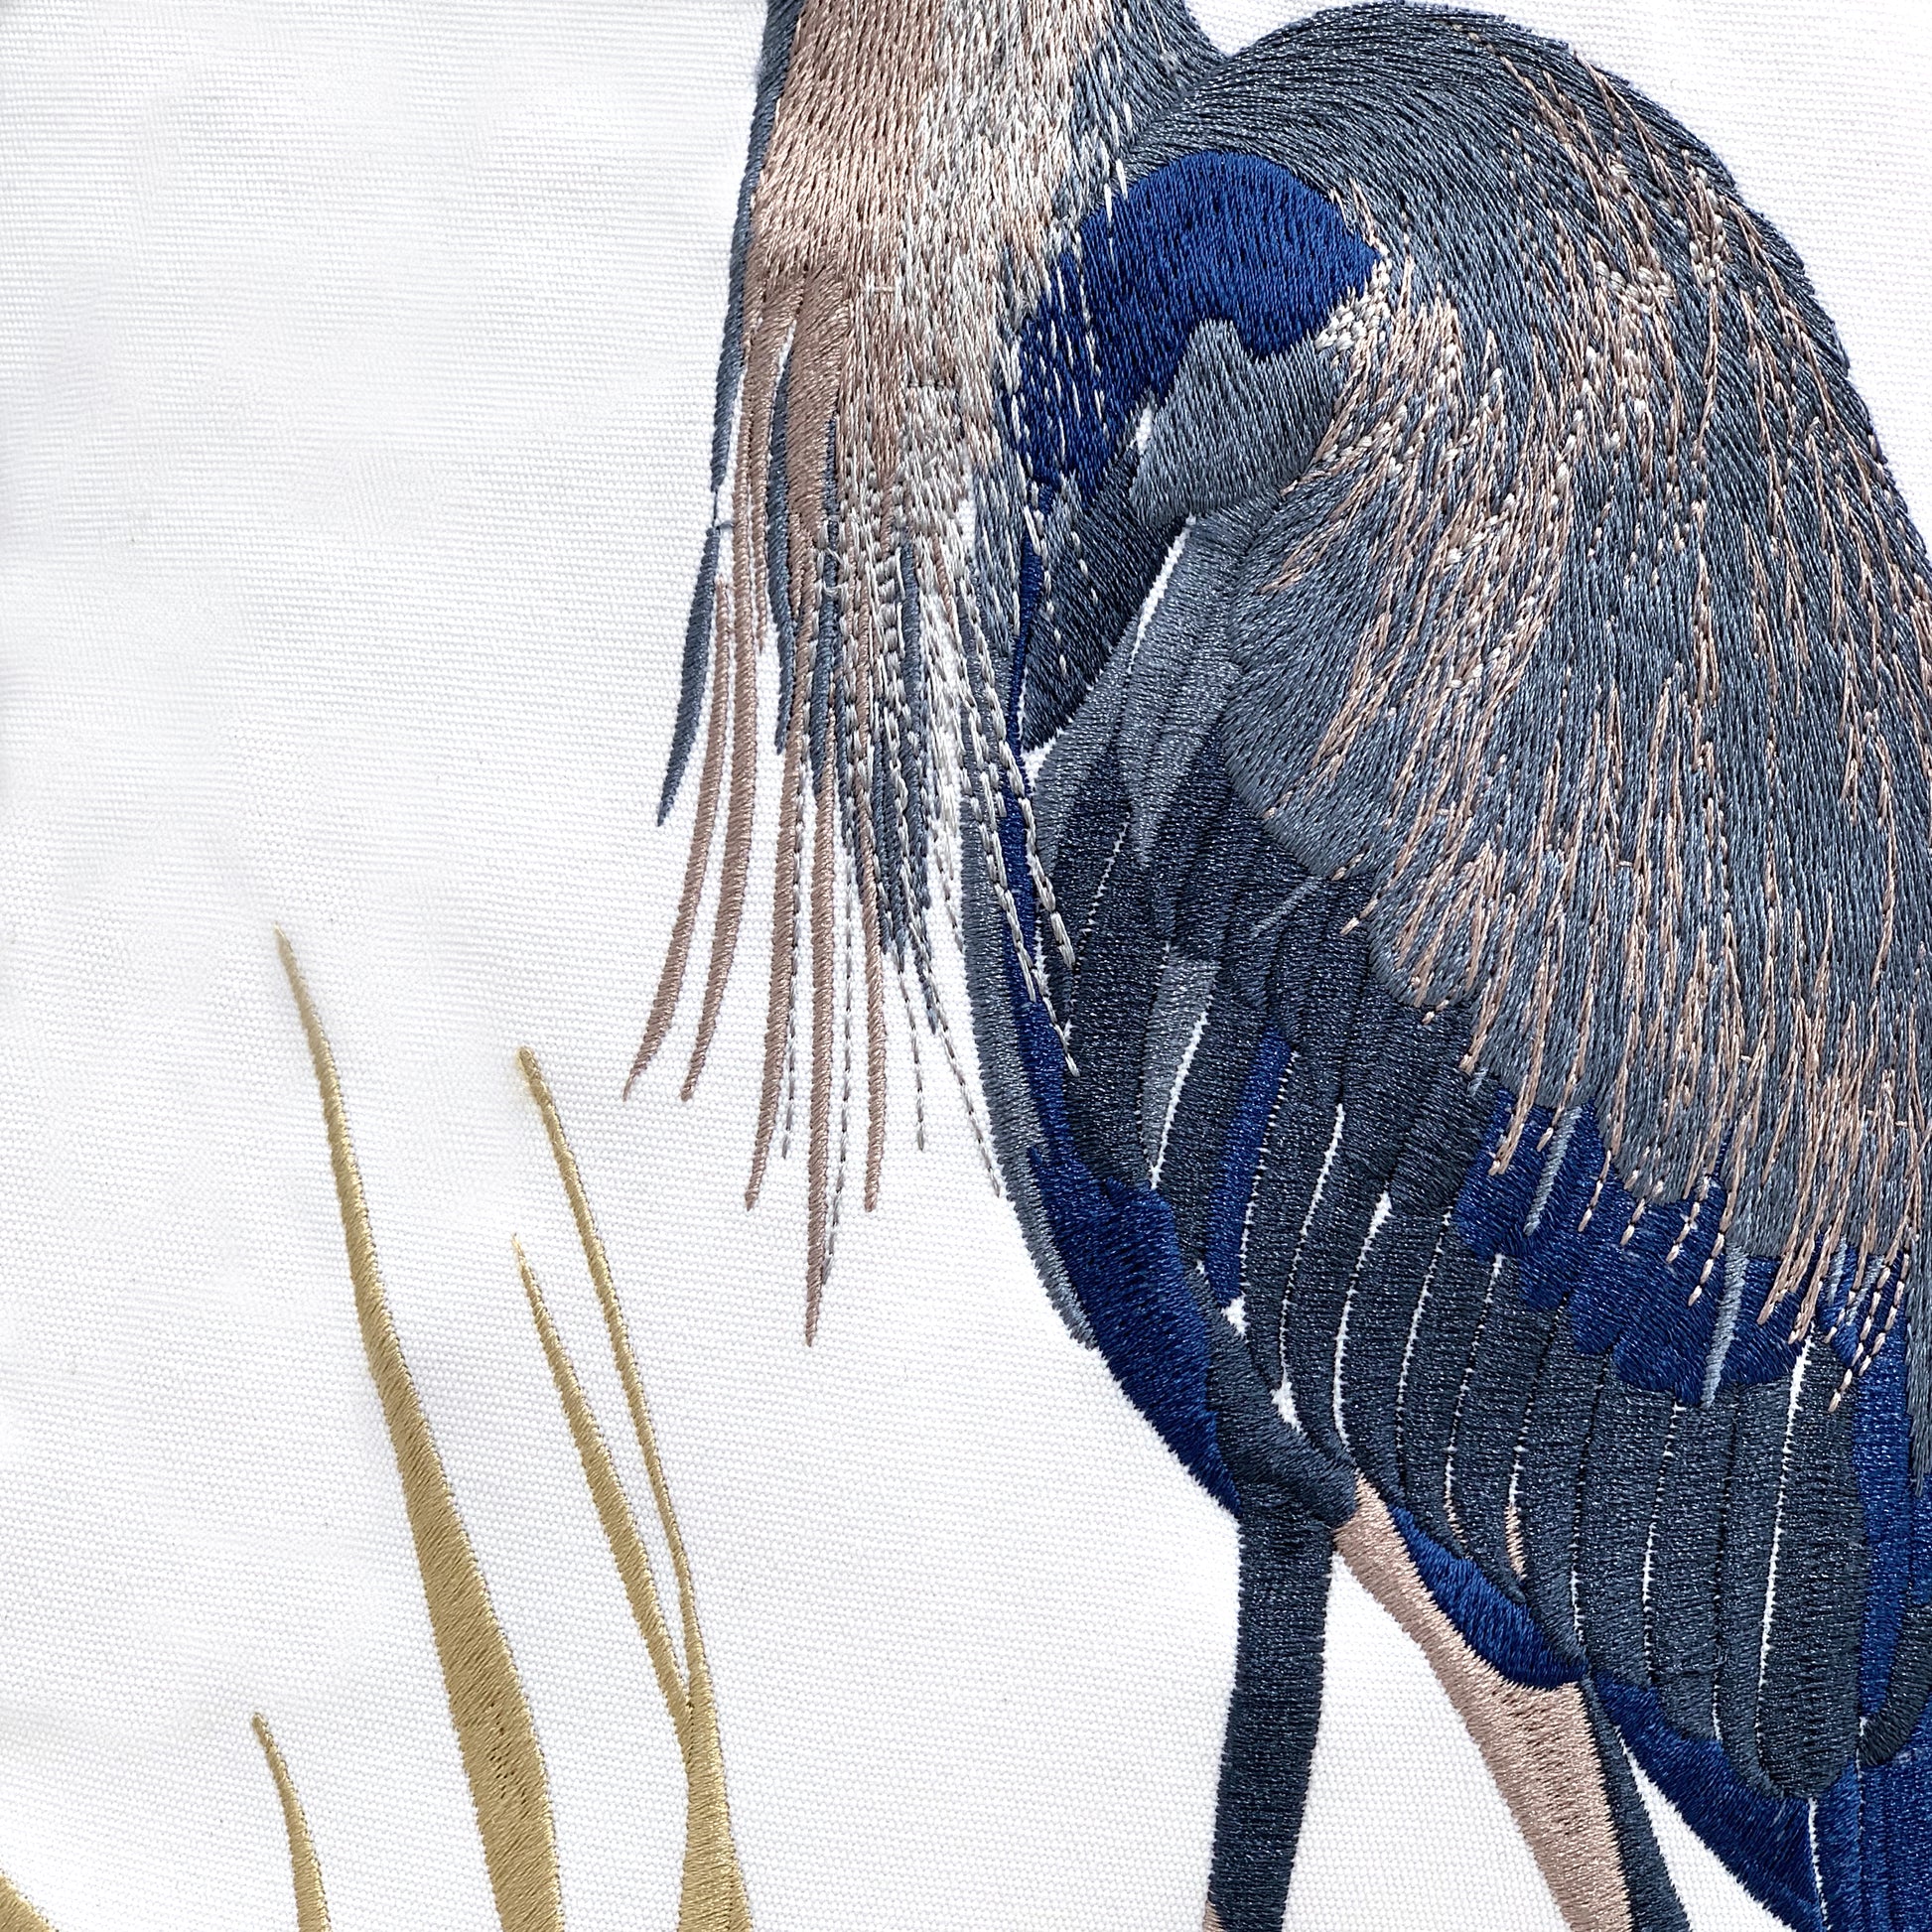 detail shot of the embroidery work on the Blue Heron and Saltmarsh Indoor Outdoor pillow.